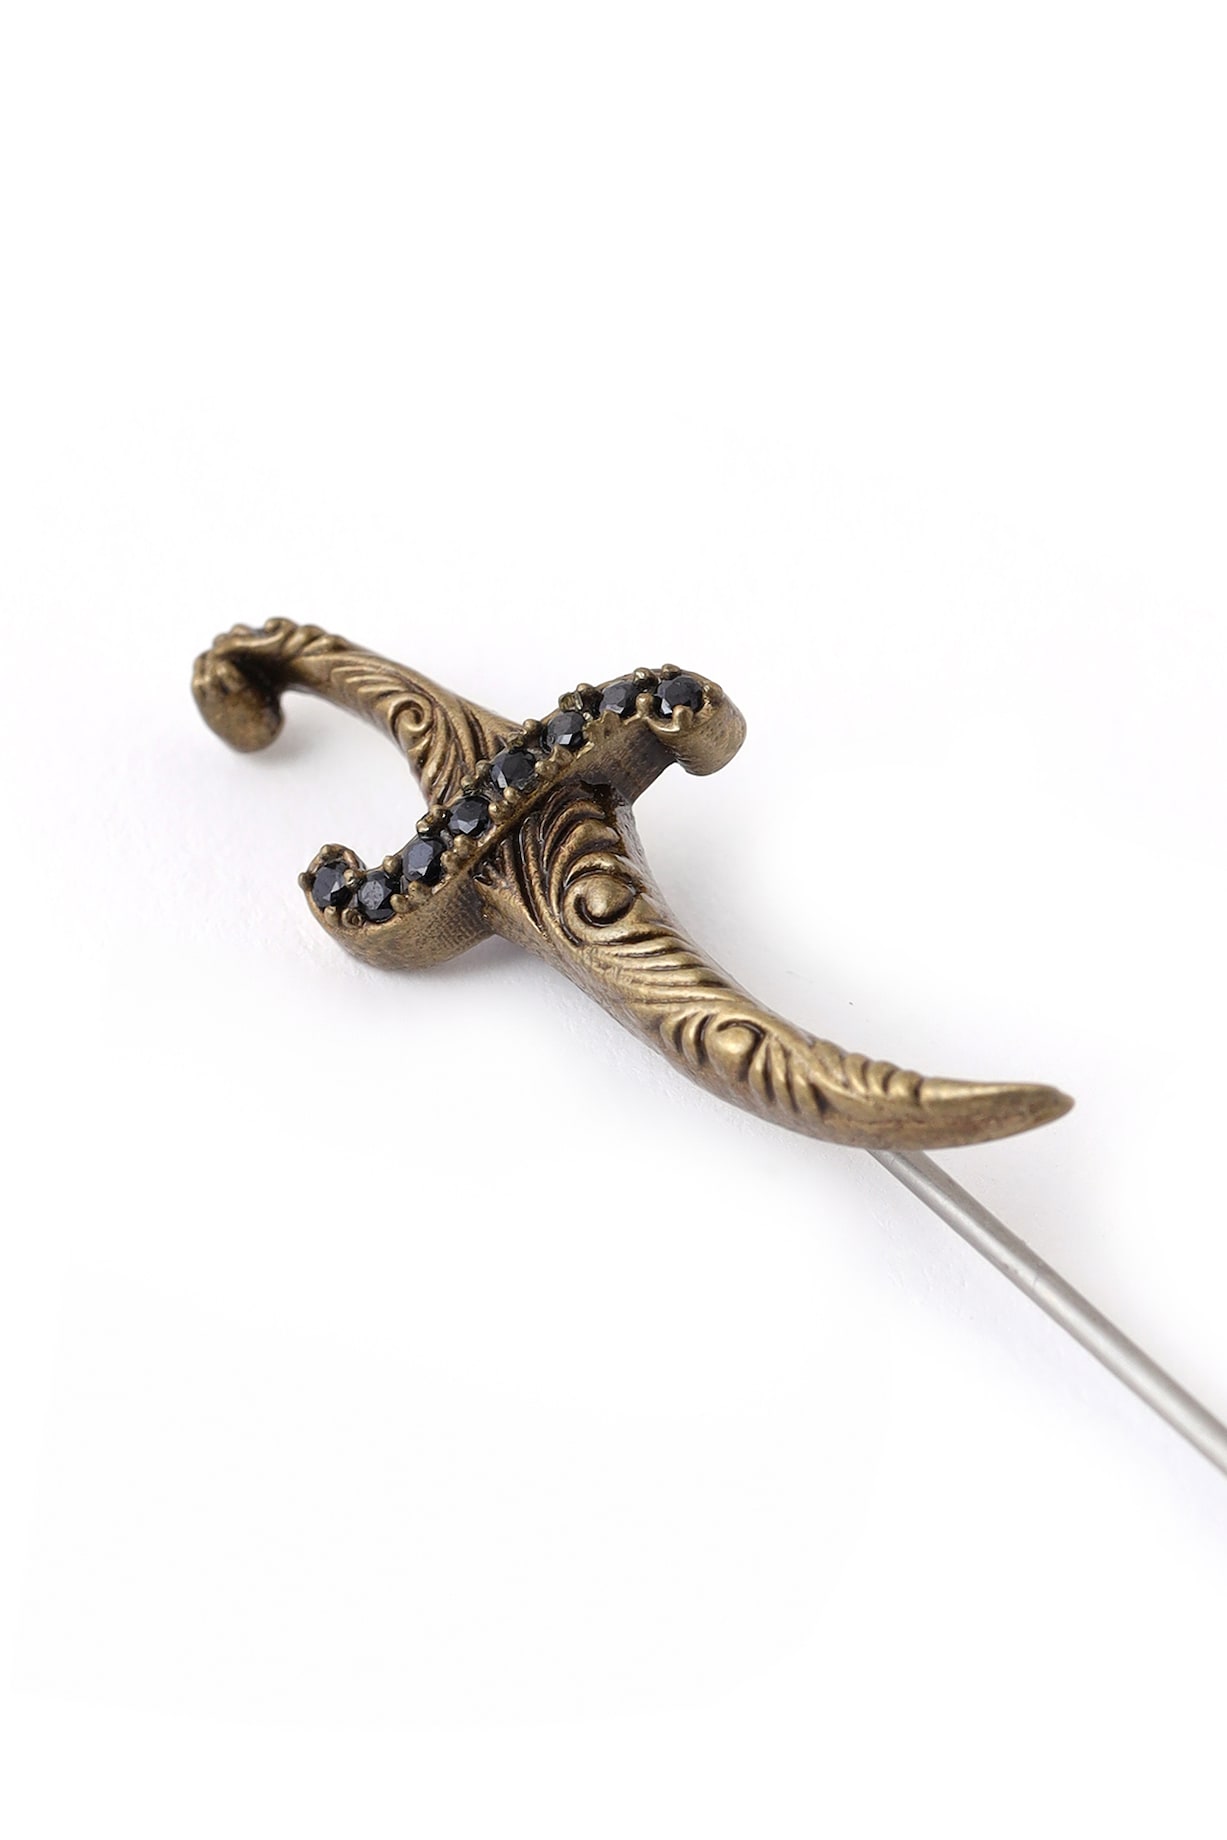 Antique Gold Medieval War Weapon Lapel Pin Design by Cosa Nostraa